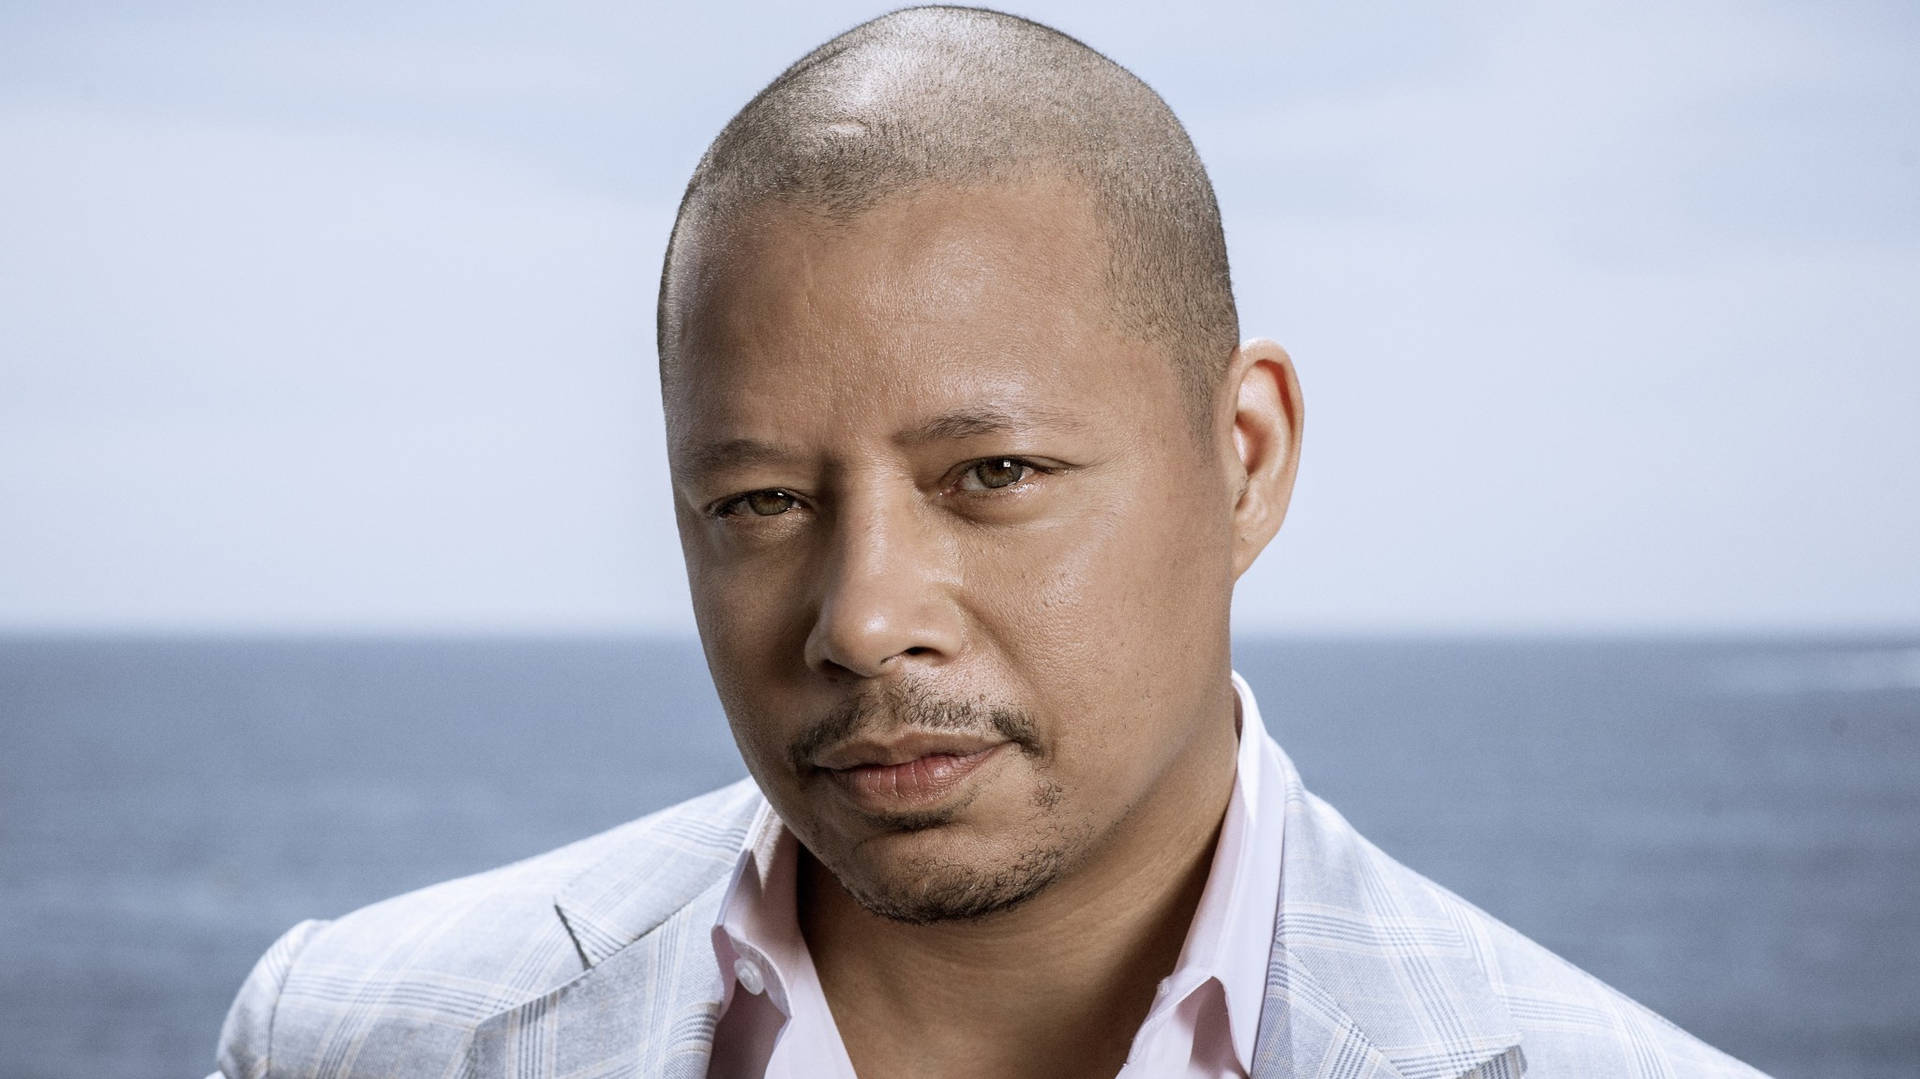 Terrence Howard With A Shaved Head Wallpaper